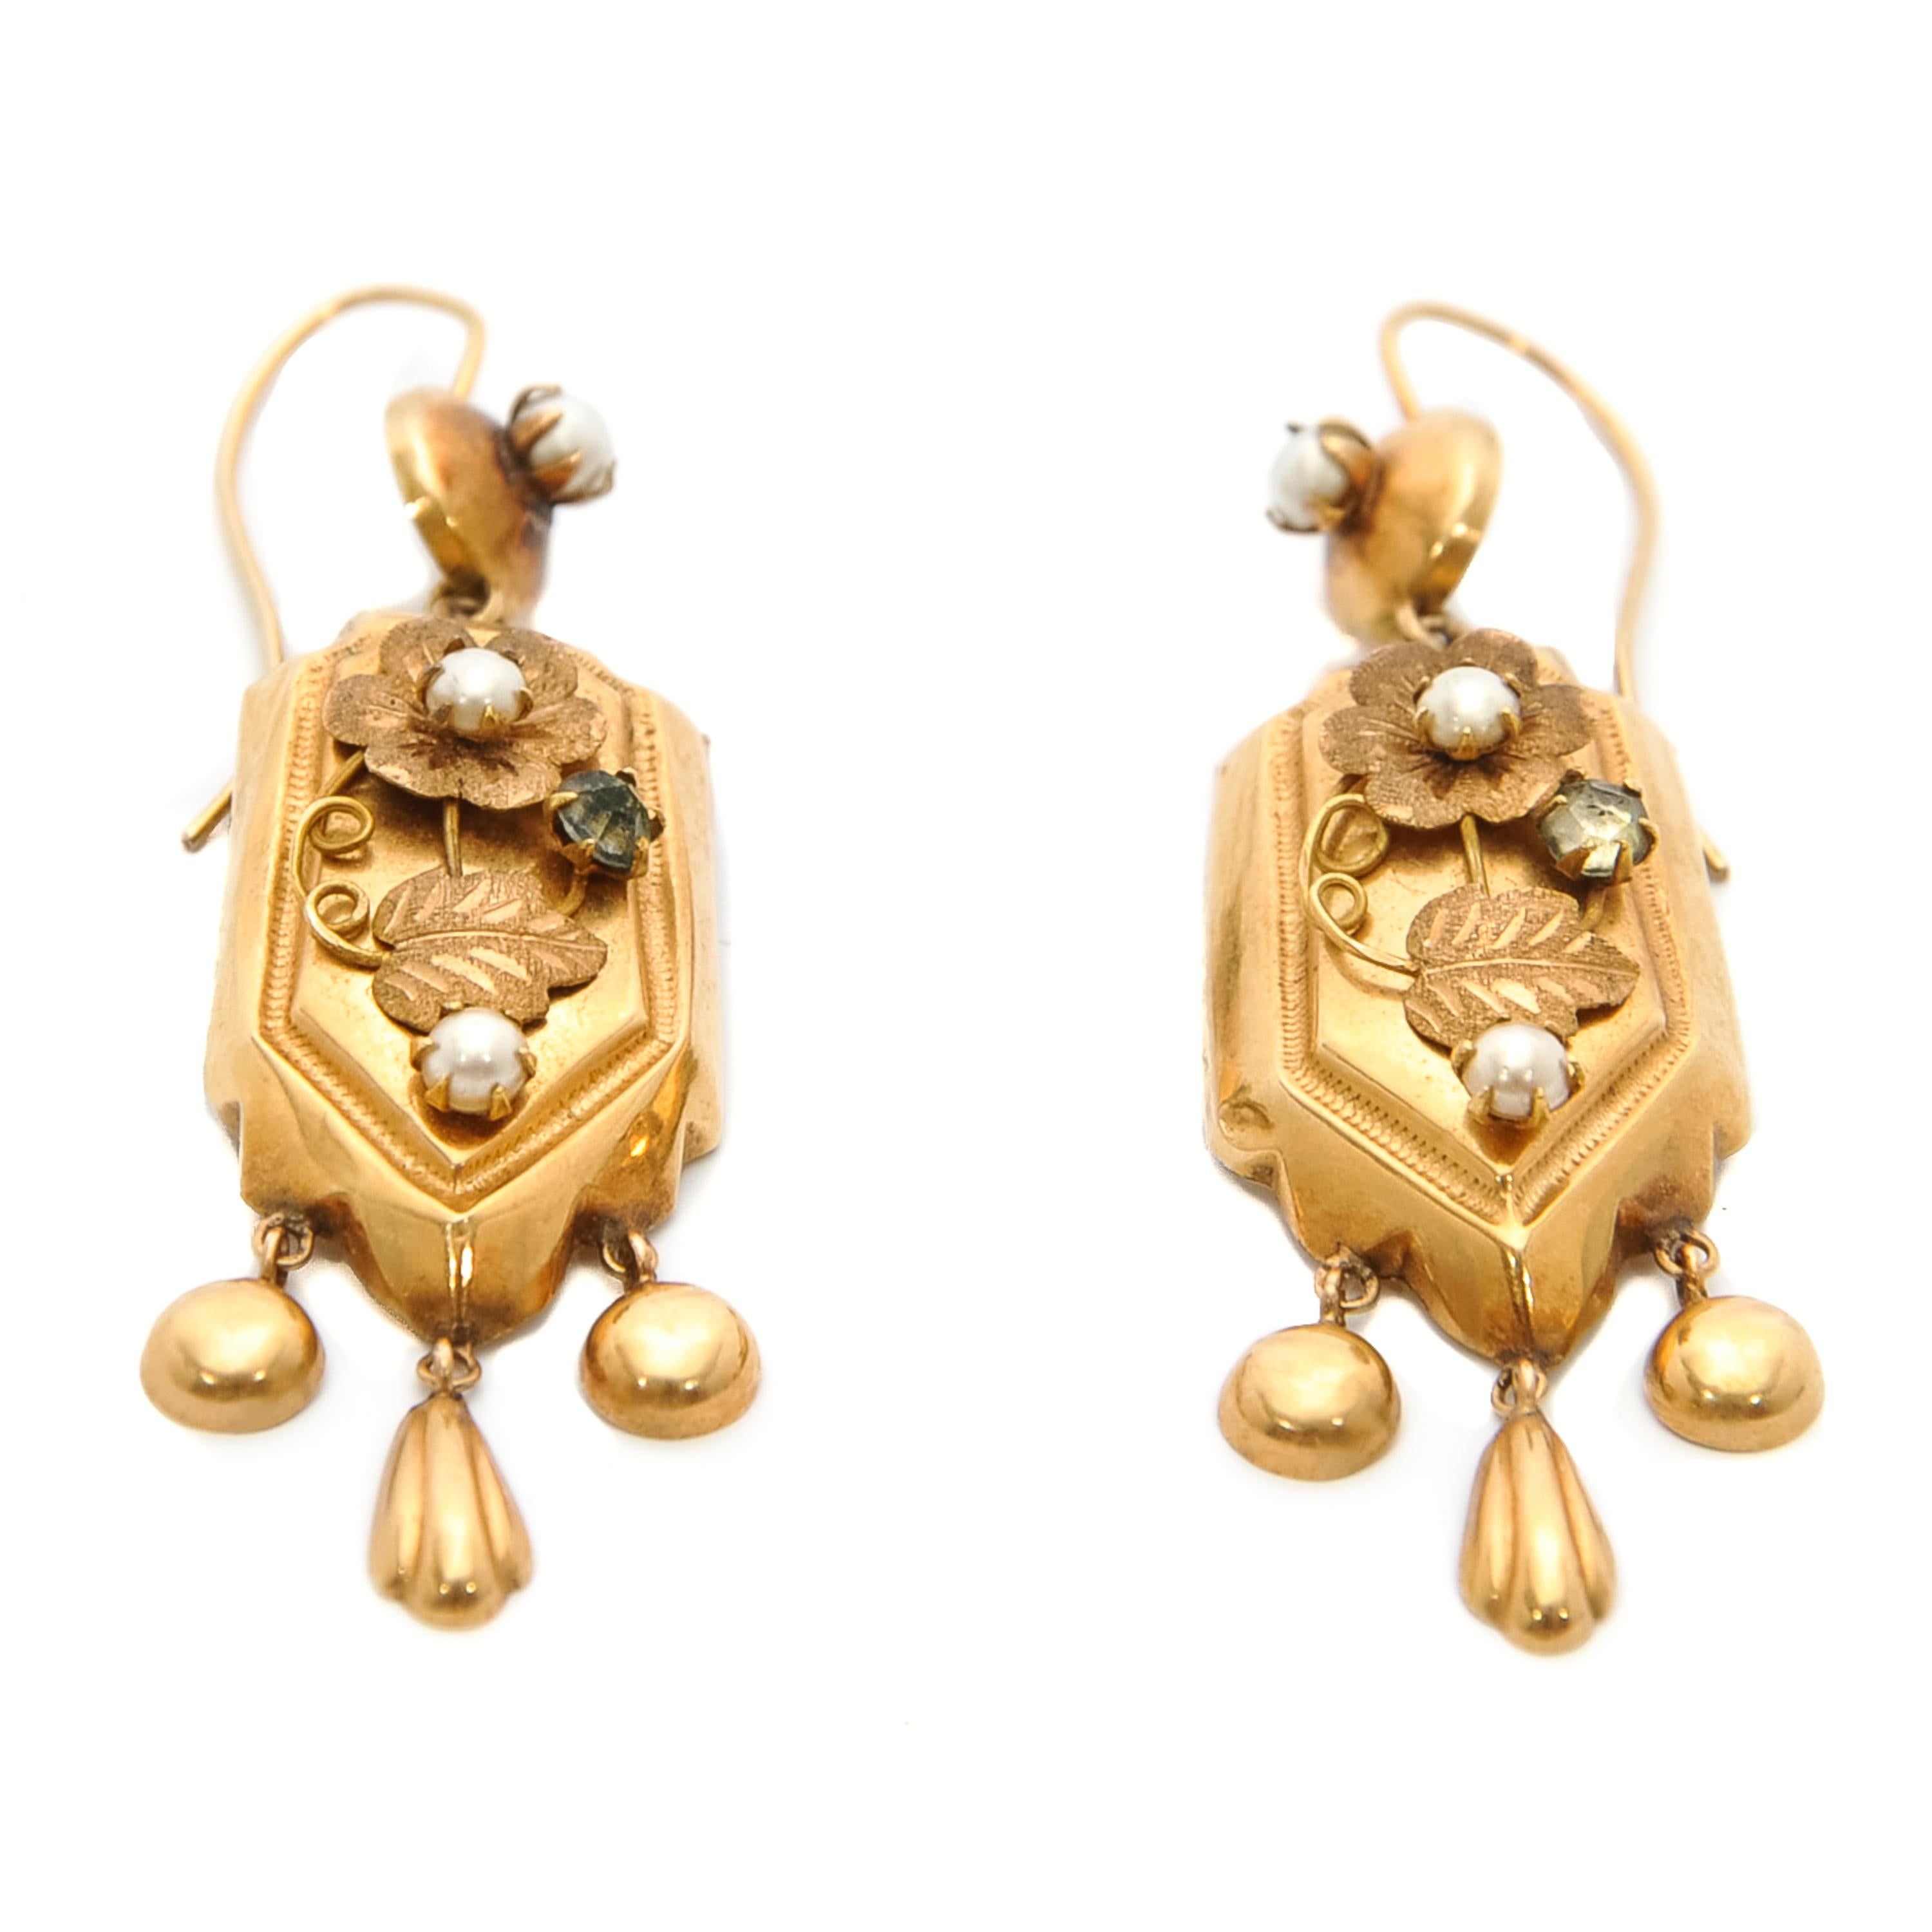 This amazing pair is searching for a new home! Maybe with you, or to give as a gift to a loved one?! 

These 18 karat yellow gold dangle earrings feature pearls and a diamond. The earrings are refined with a rich decoration of leaves, three clear